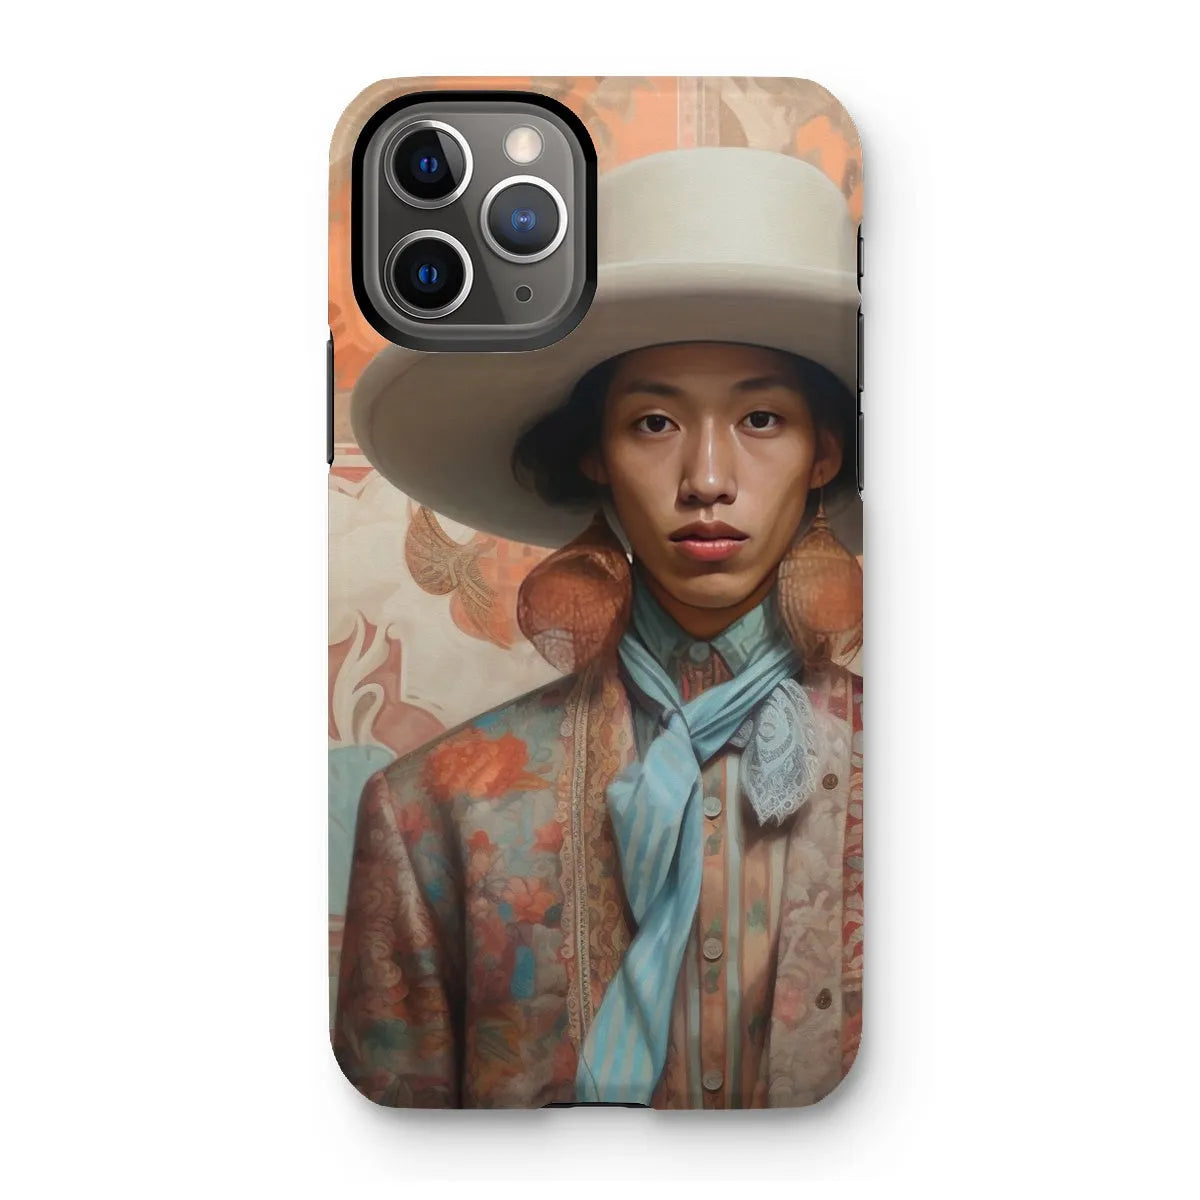 Iyaan - Gay Malay Asian Cowboy Aesthetic Art Phone Case - Iphone 11 Pro / Matte - Mobile Phone Cases - Aesthetic Art